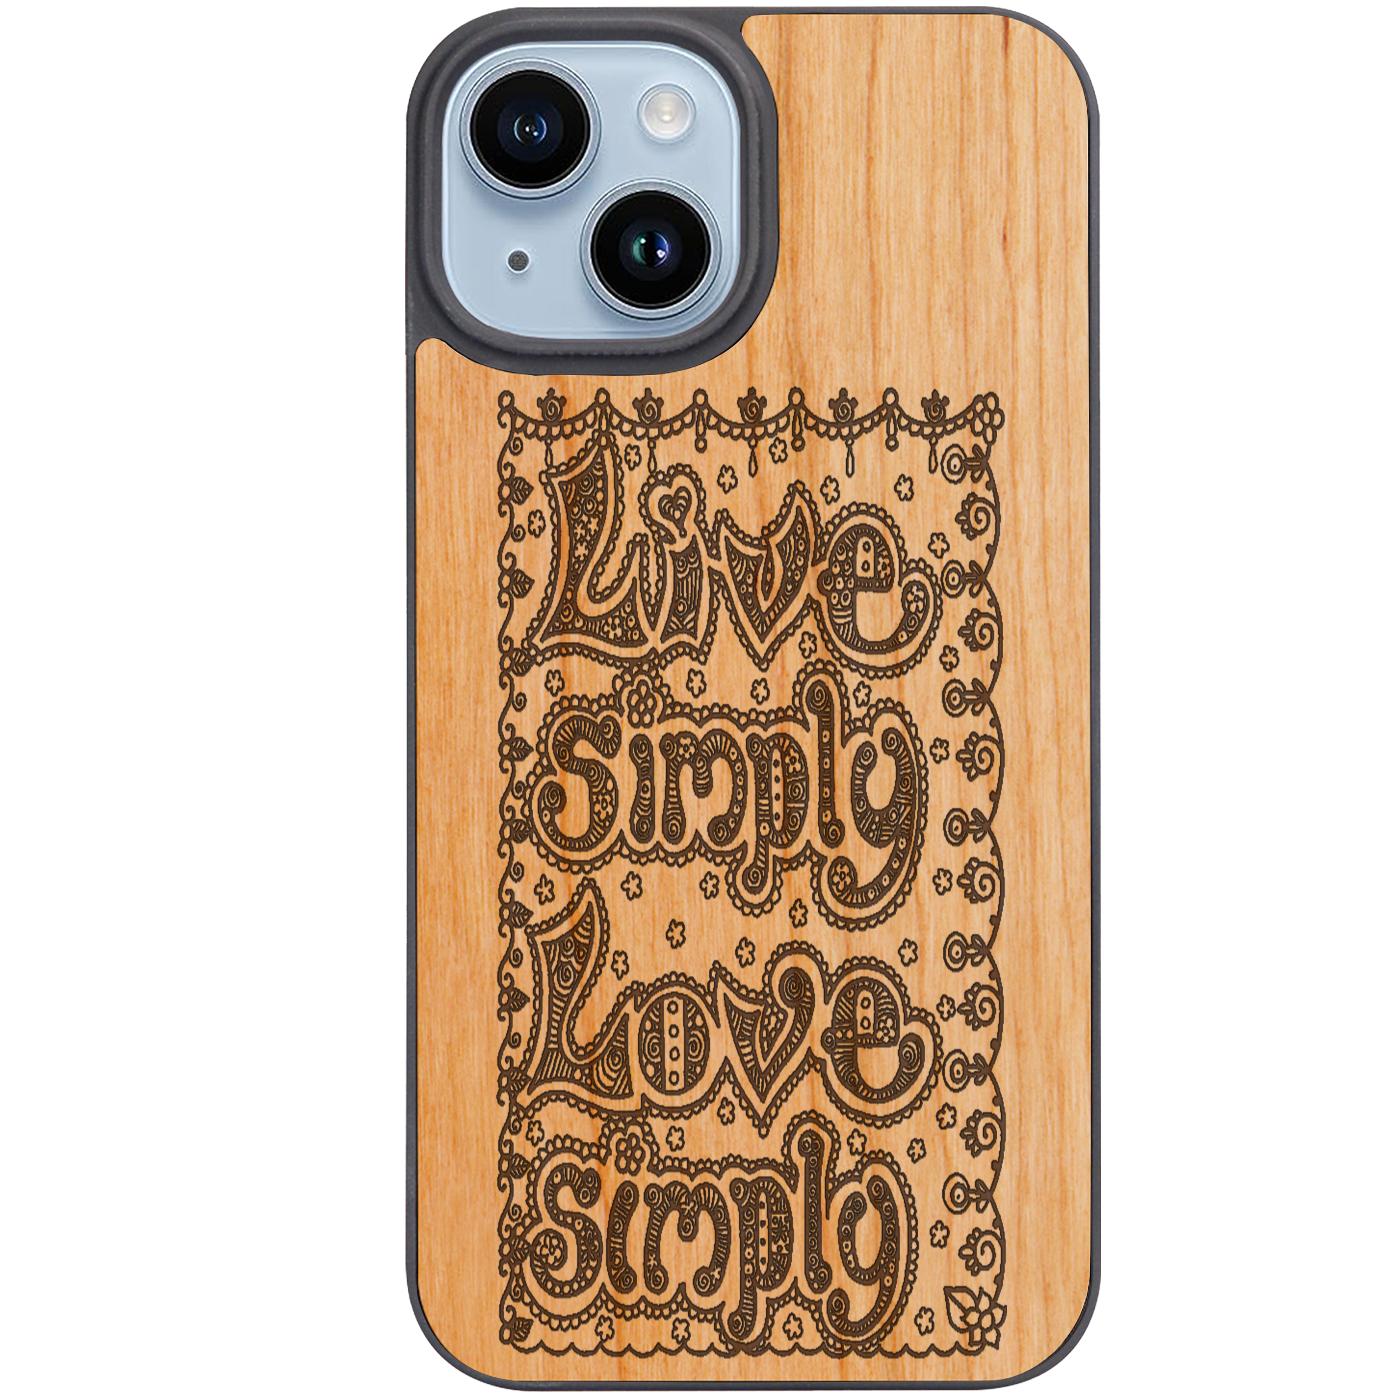 Live Simply - Engraved Phone Case